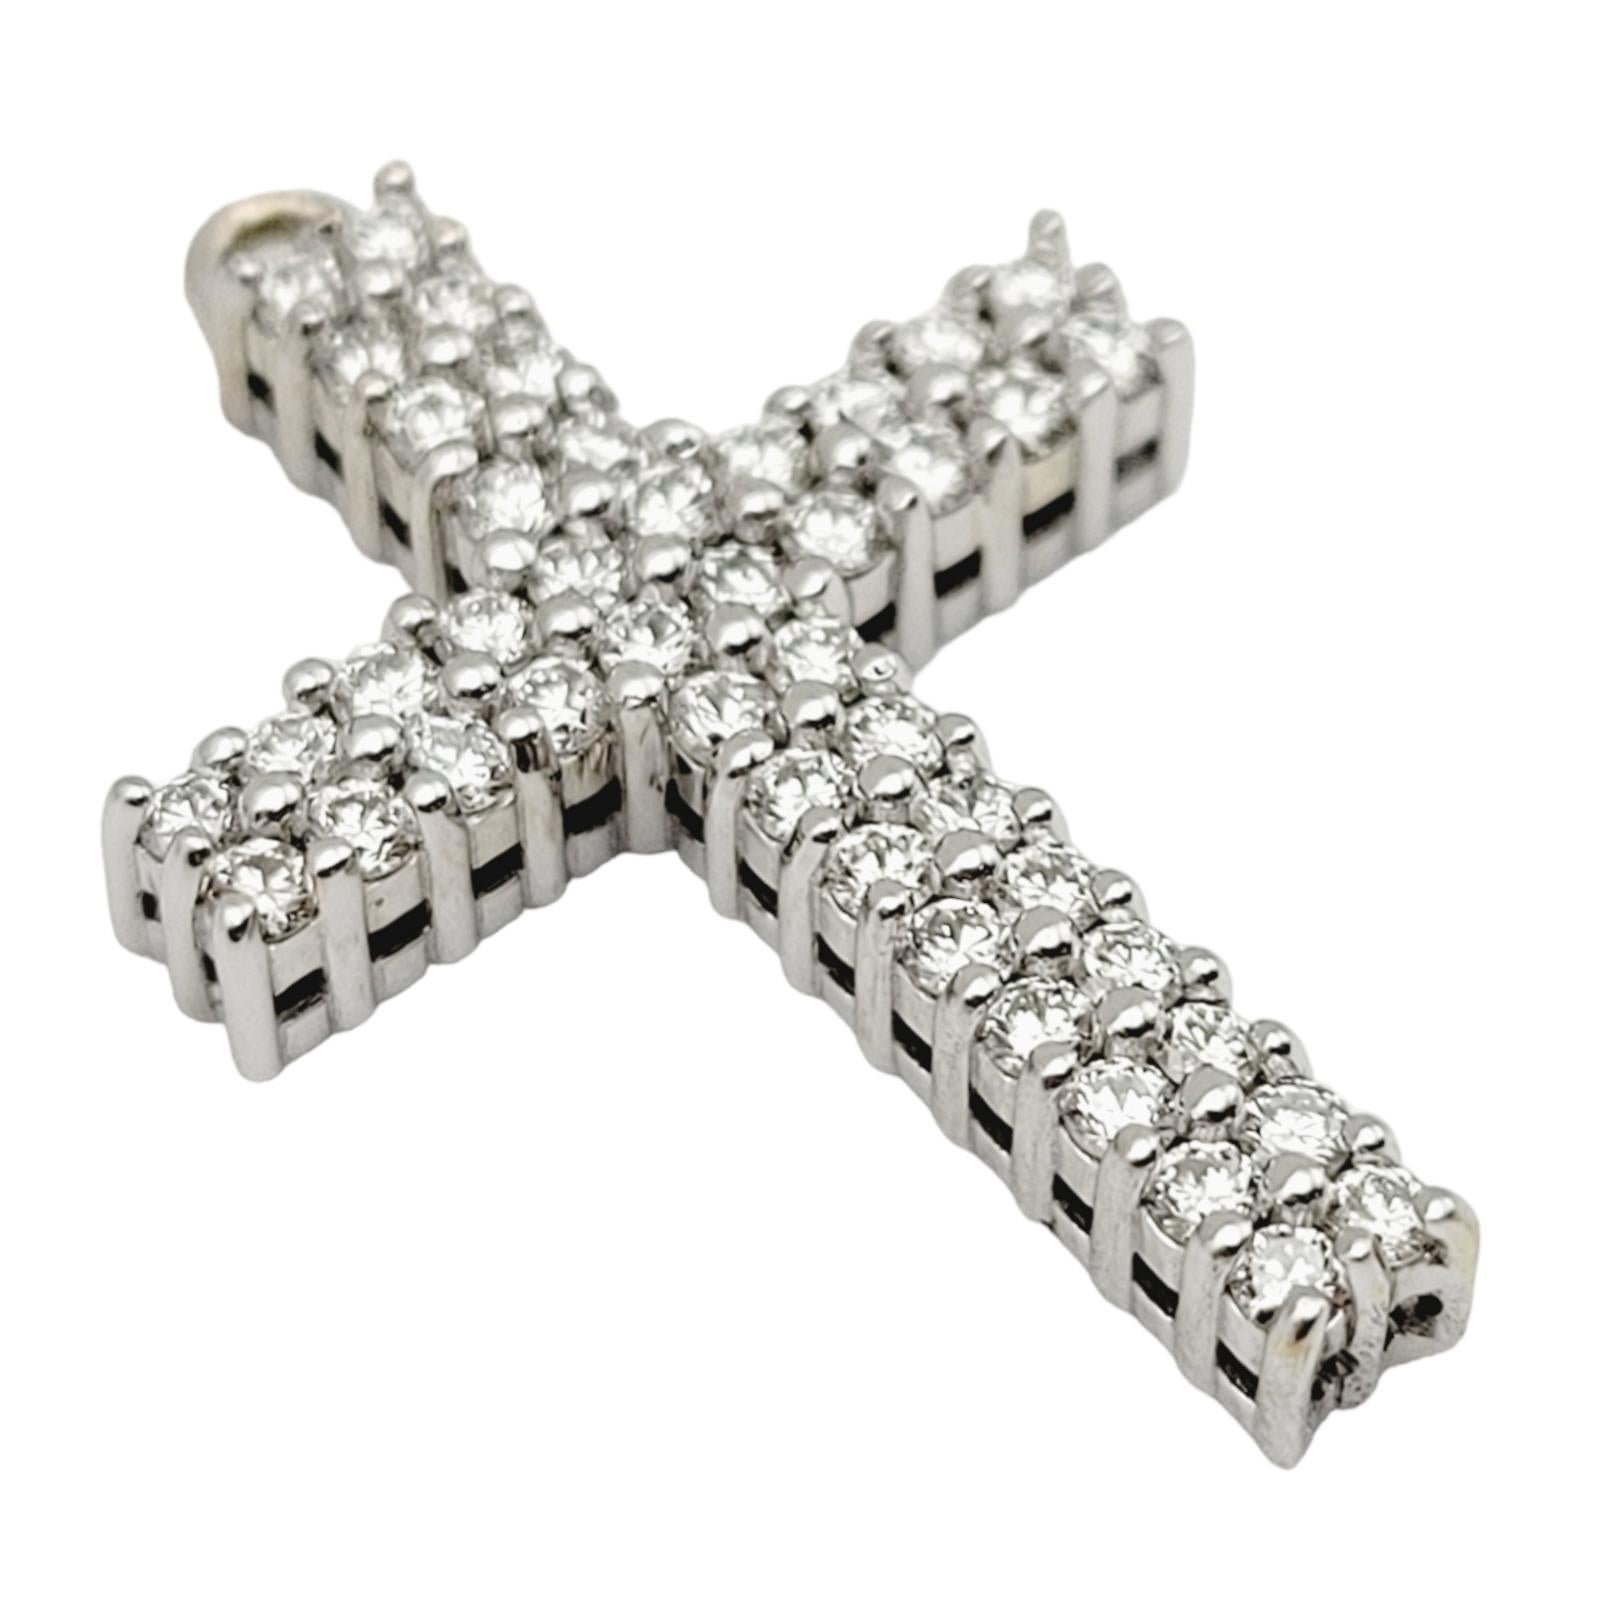 Gorgeous white gold diamond cross pendant. The cross is embellished with 0.55 carats of sparkling natural round brilliant diamonds, F-G in color and VS1-VS2 in clarity. The stunning diamonds are pave set in two rows and fill the entire cross. The